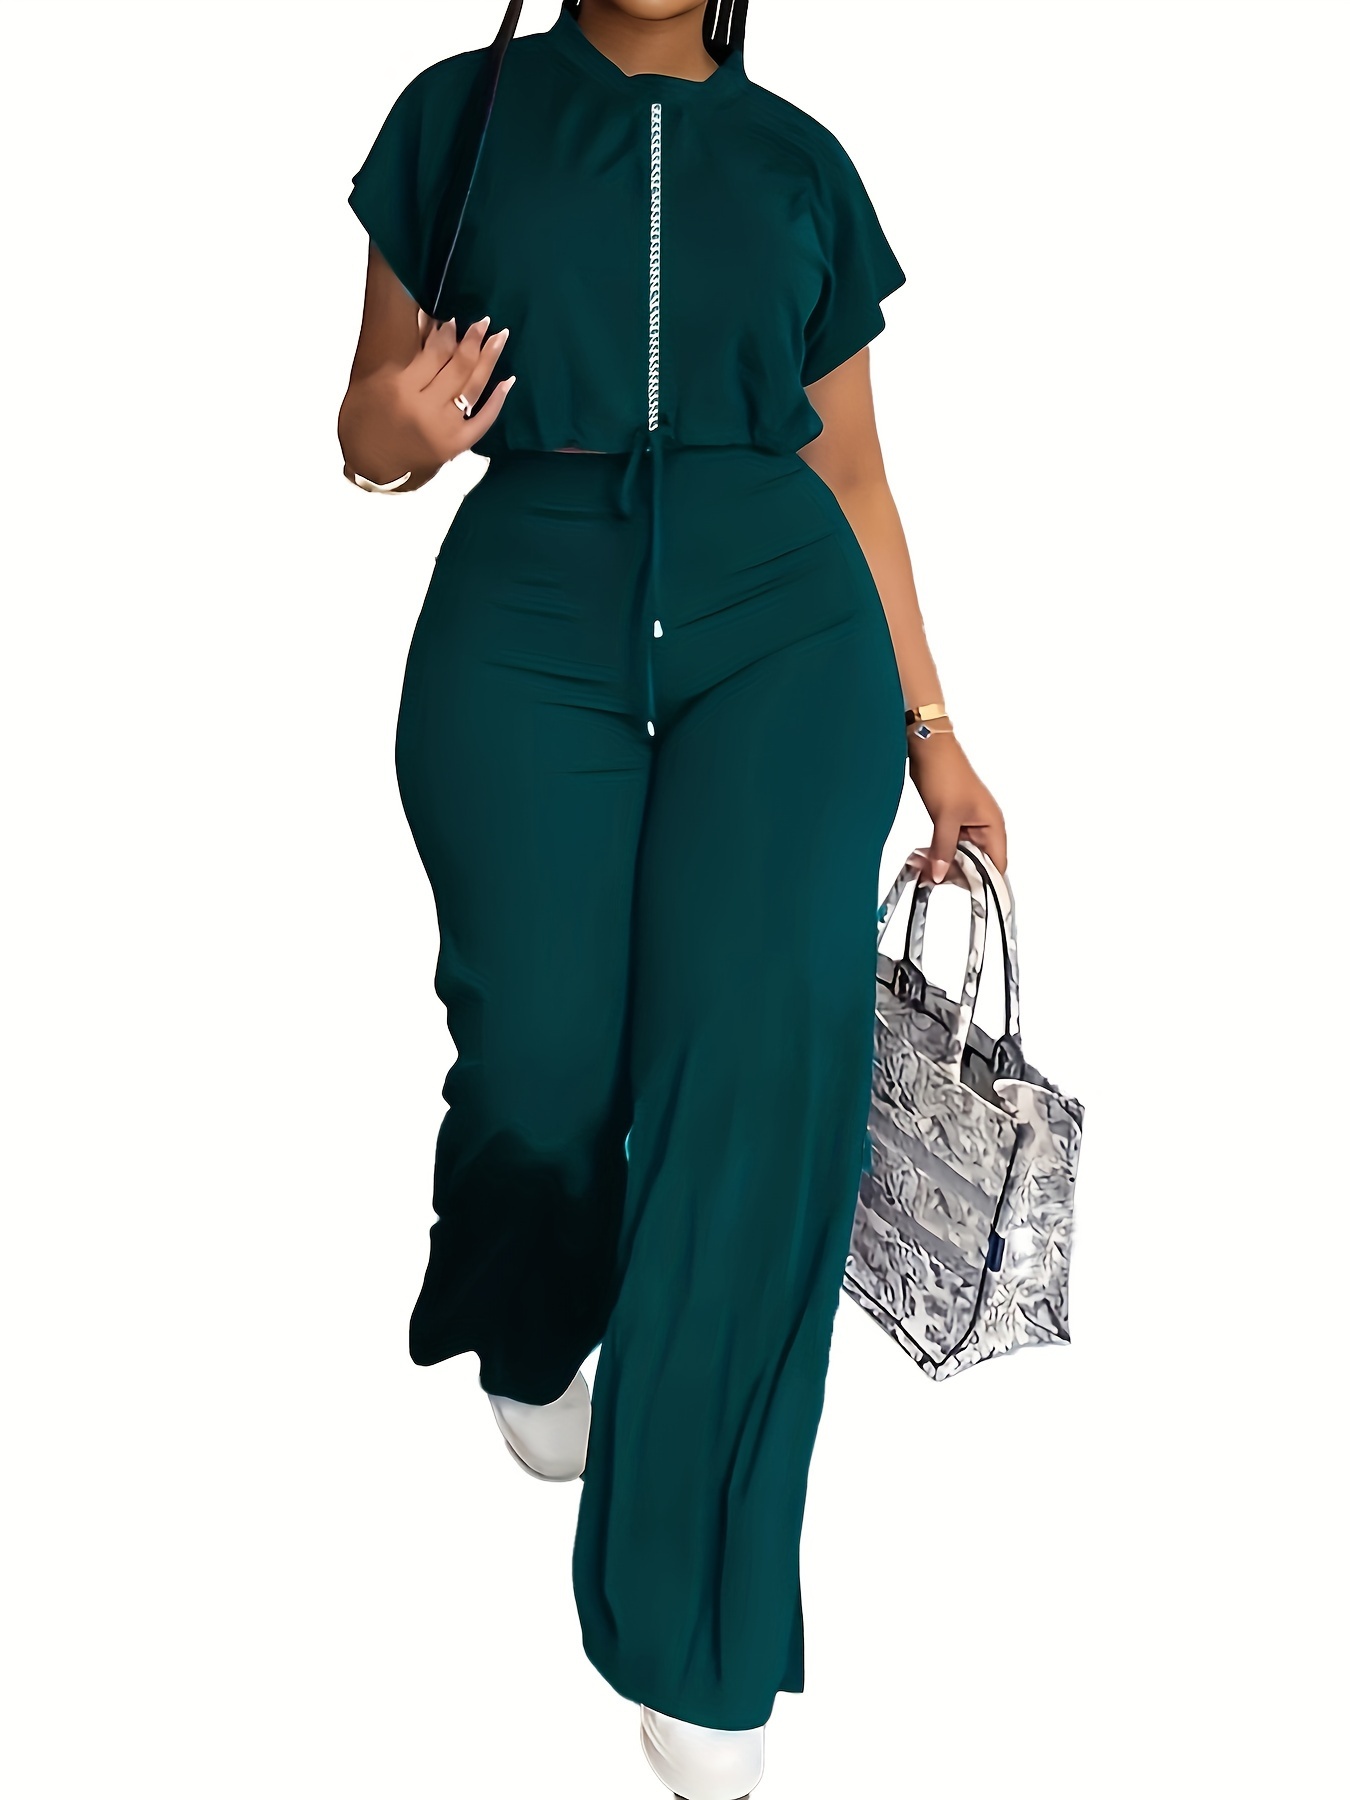 Summer Casual O Neck Knotted Two Piece Set For Women Short Sleeve Crop T  Shirt And Long Plain Pants From Amoy2021, $20.21